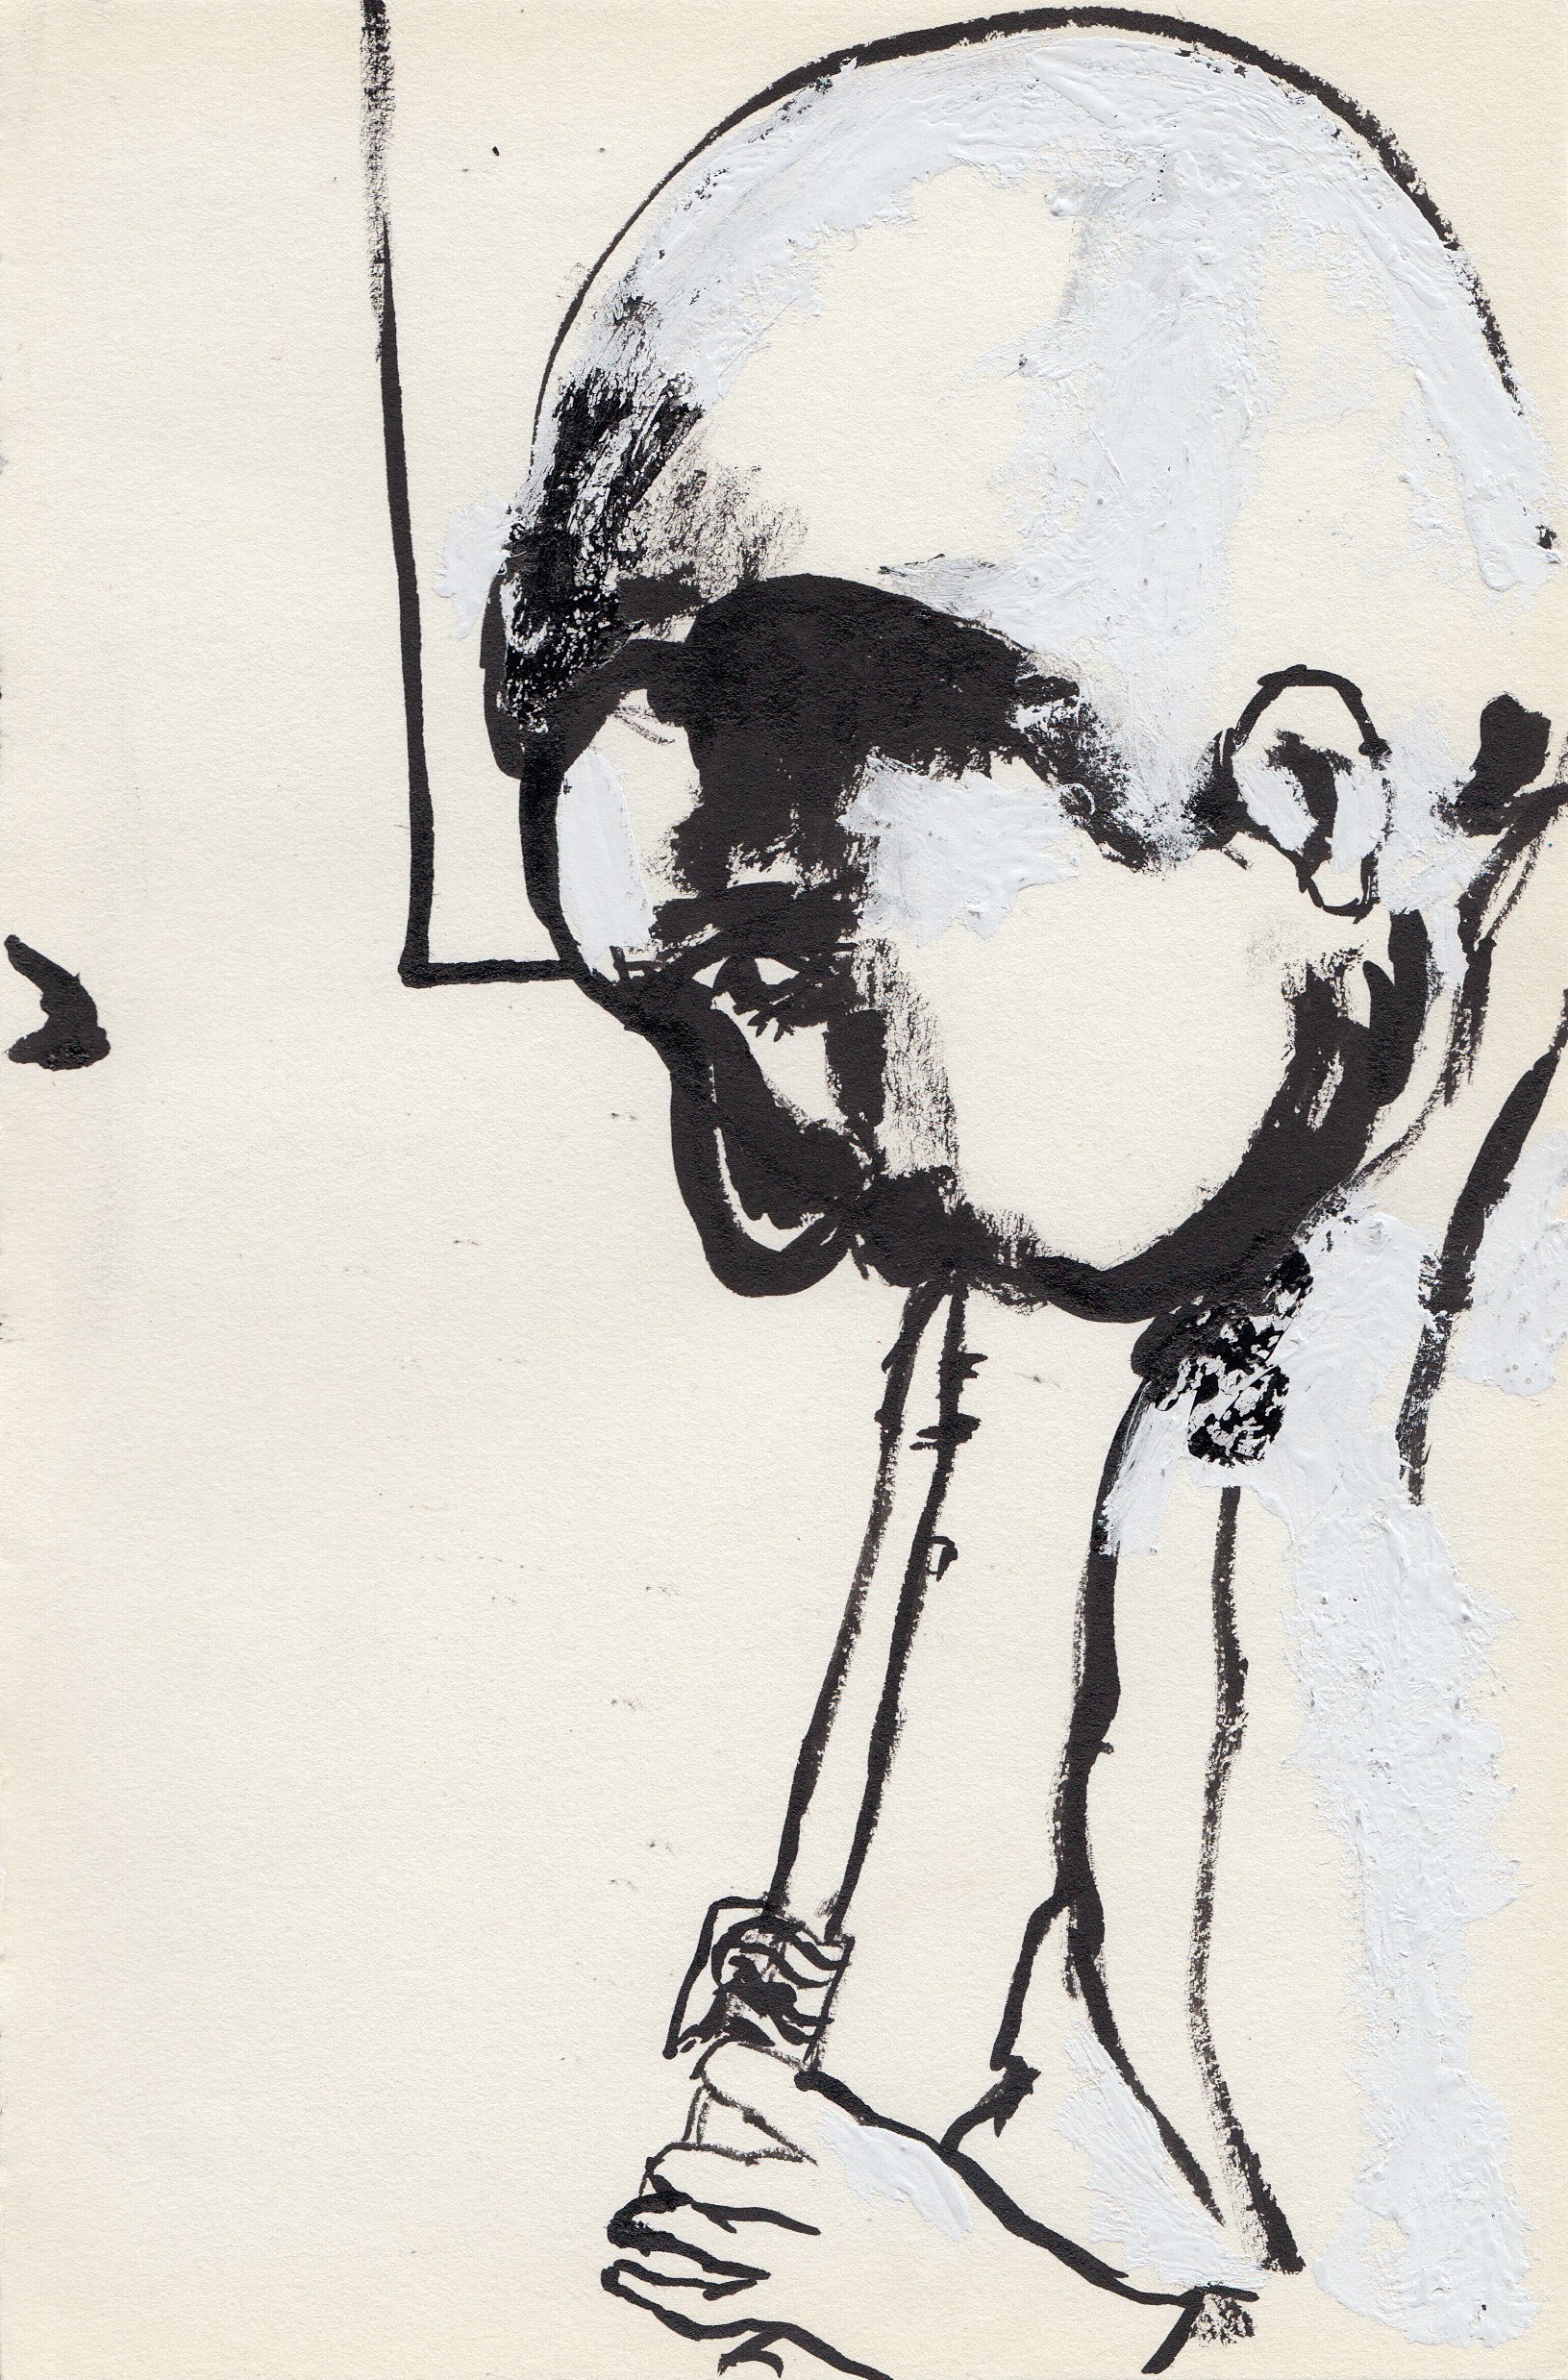   Clarinet Player , 2021 Ink on paper, 8.25 x 5.5 inches 